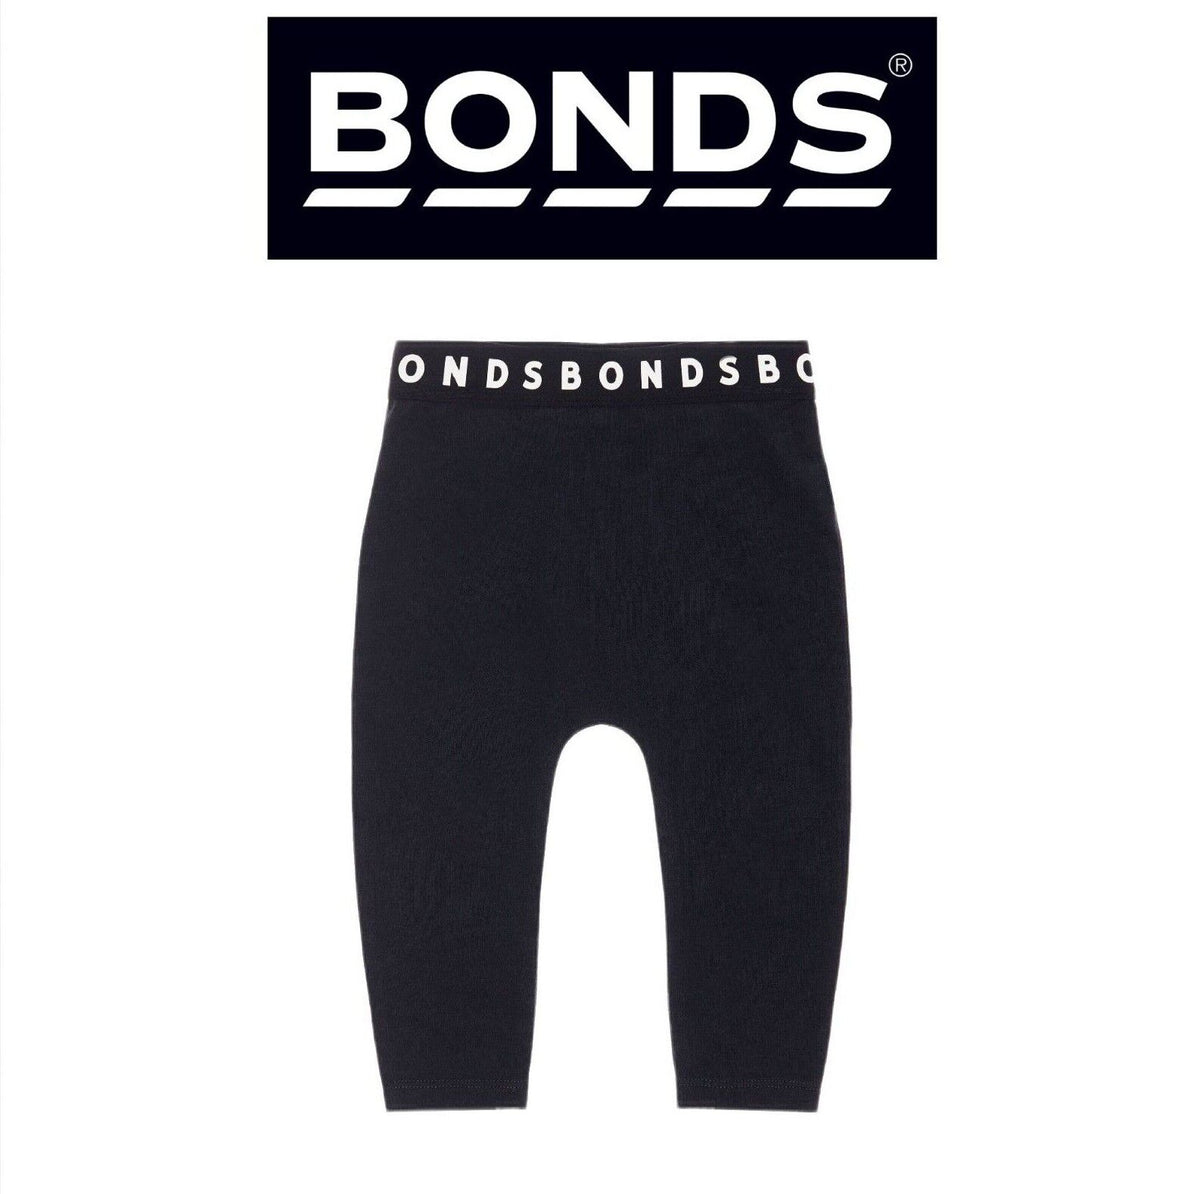 Bonds Baby Stretchies Legging Super Soft & Stretchable Comfortable BXF8A